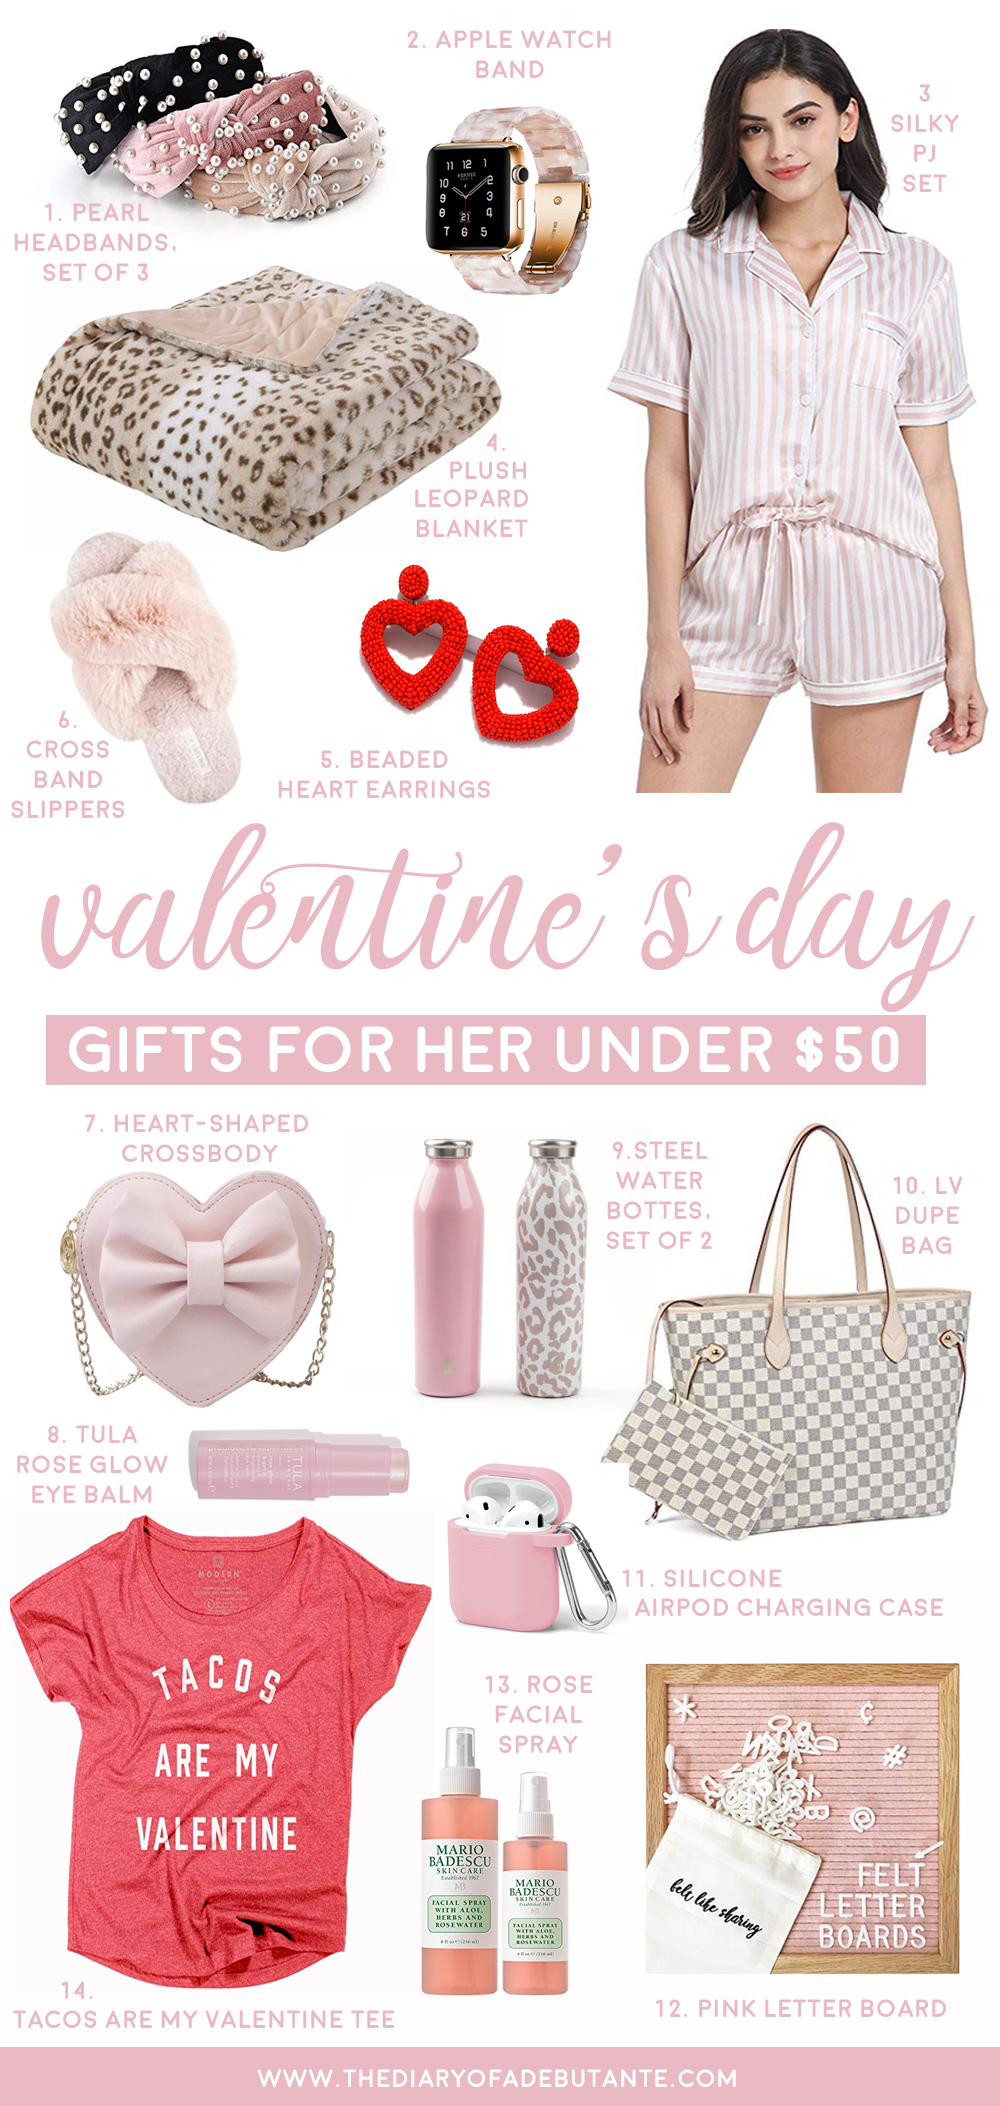 50+ Best Valentine Day Gifts For Wife in - fnp.ae-calidas.vn